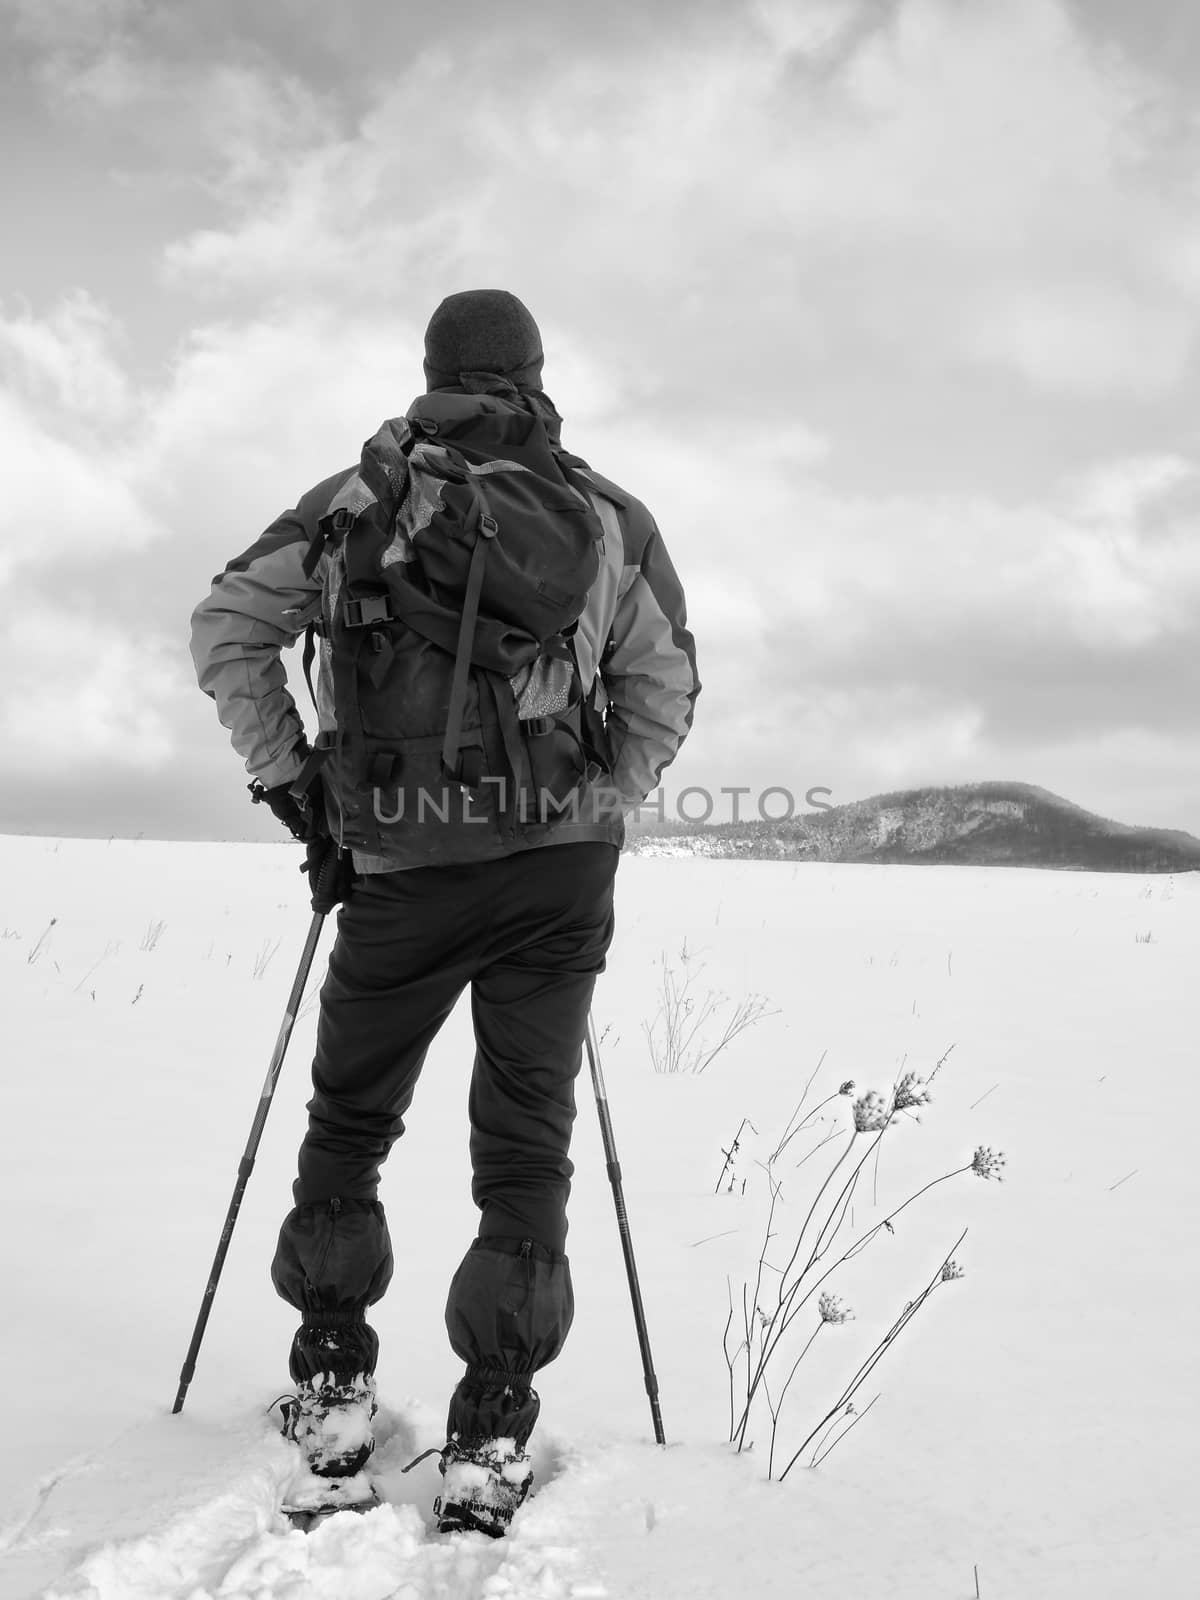 Man with snowshoes and backpack take a rest in snow. Hiker in winter jacket and trekking trousers snowshoeing in powder snow. Cloudy winter day, gentle wind brings small snow flakes 